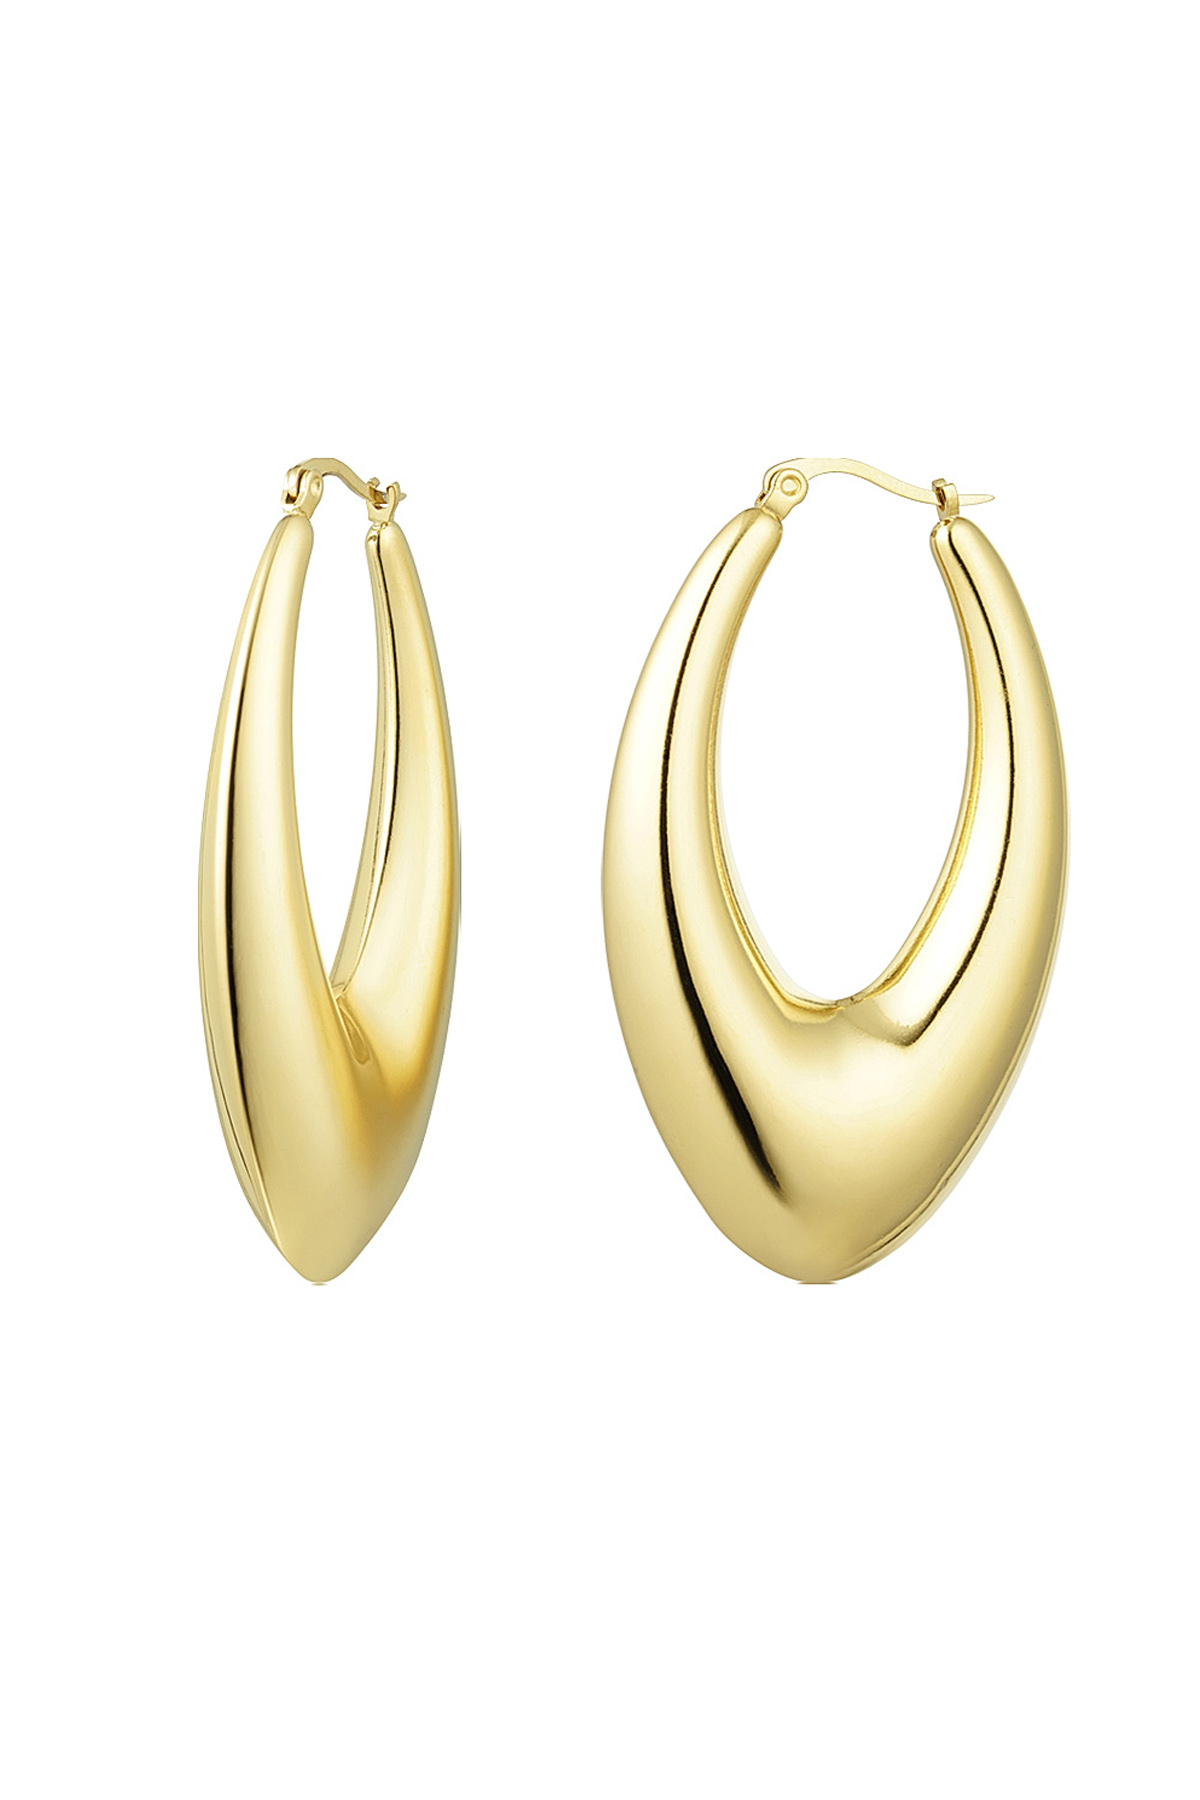 Earrings stainless steel chic small Gold